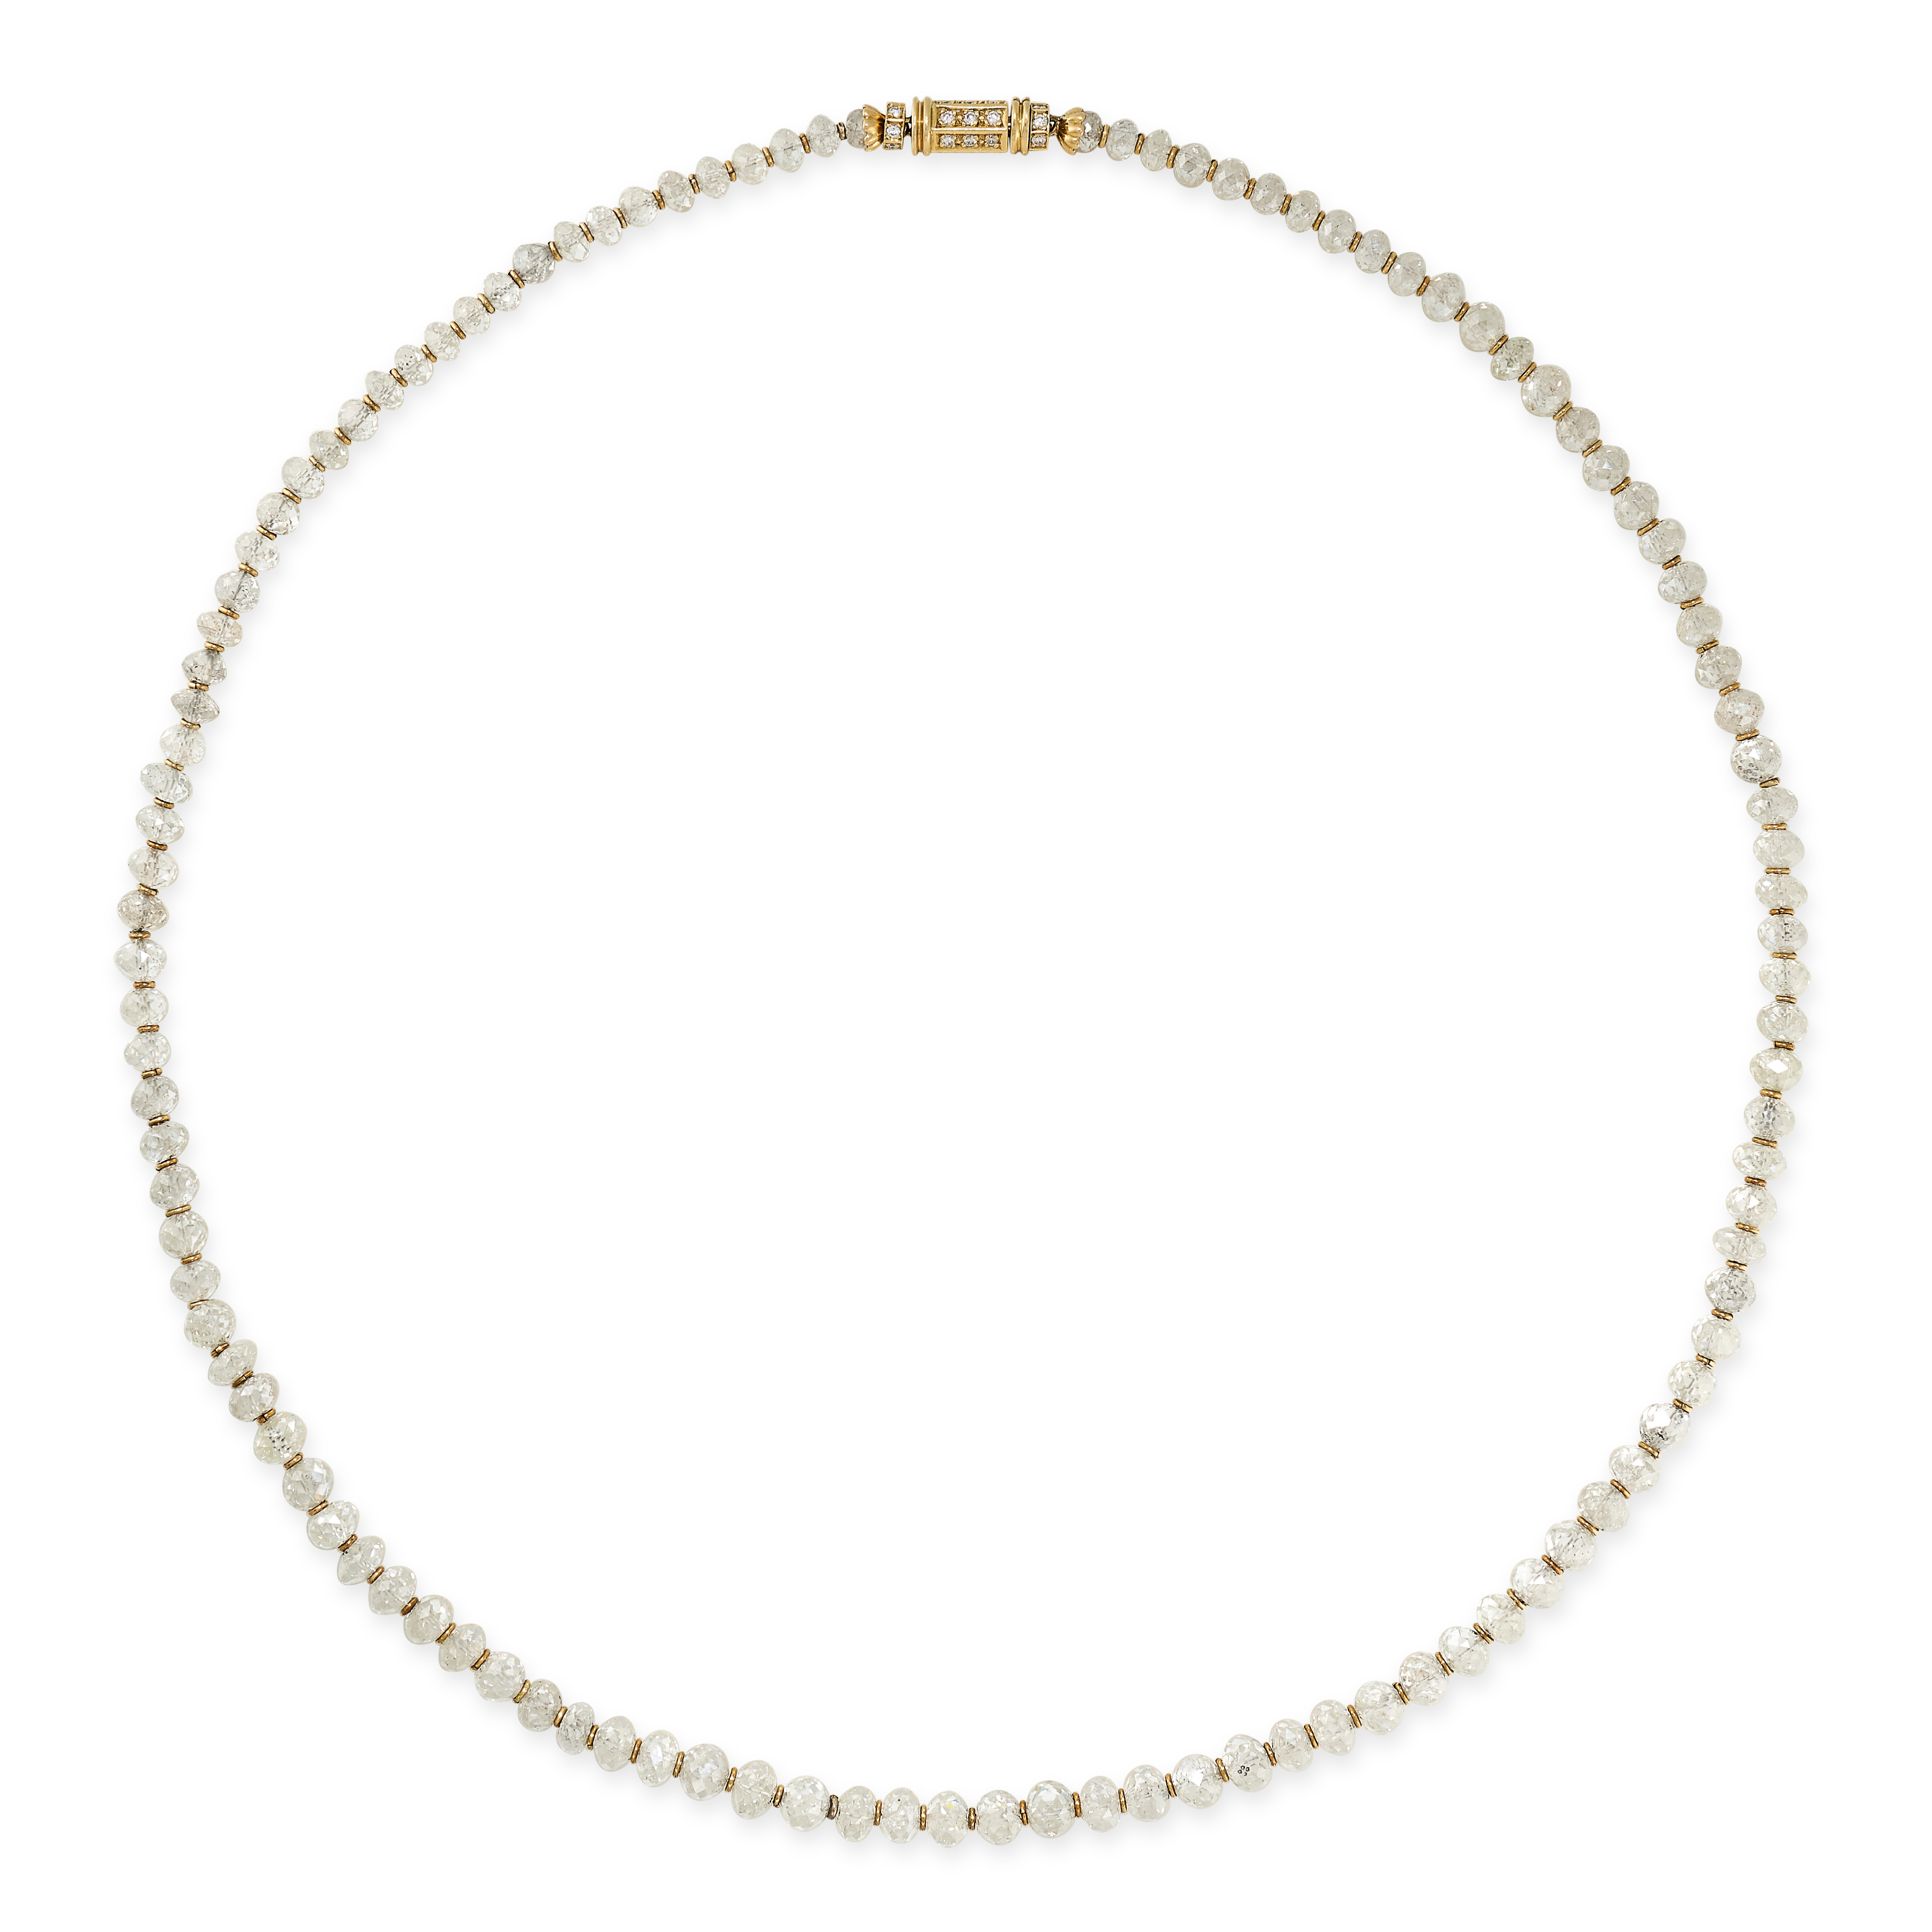 AN IMPORTANT DIAMOND NECKLACE in 18ct yellow gold, formed of a single row of one hundred and